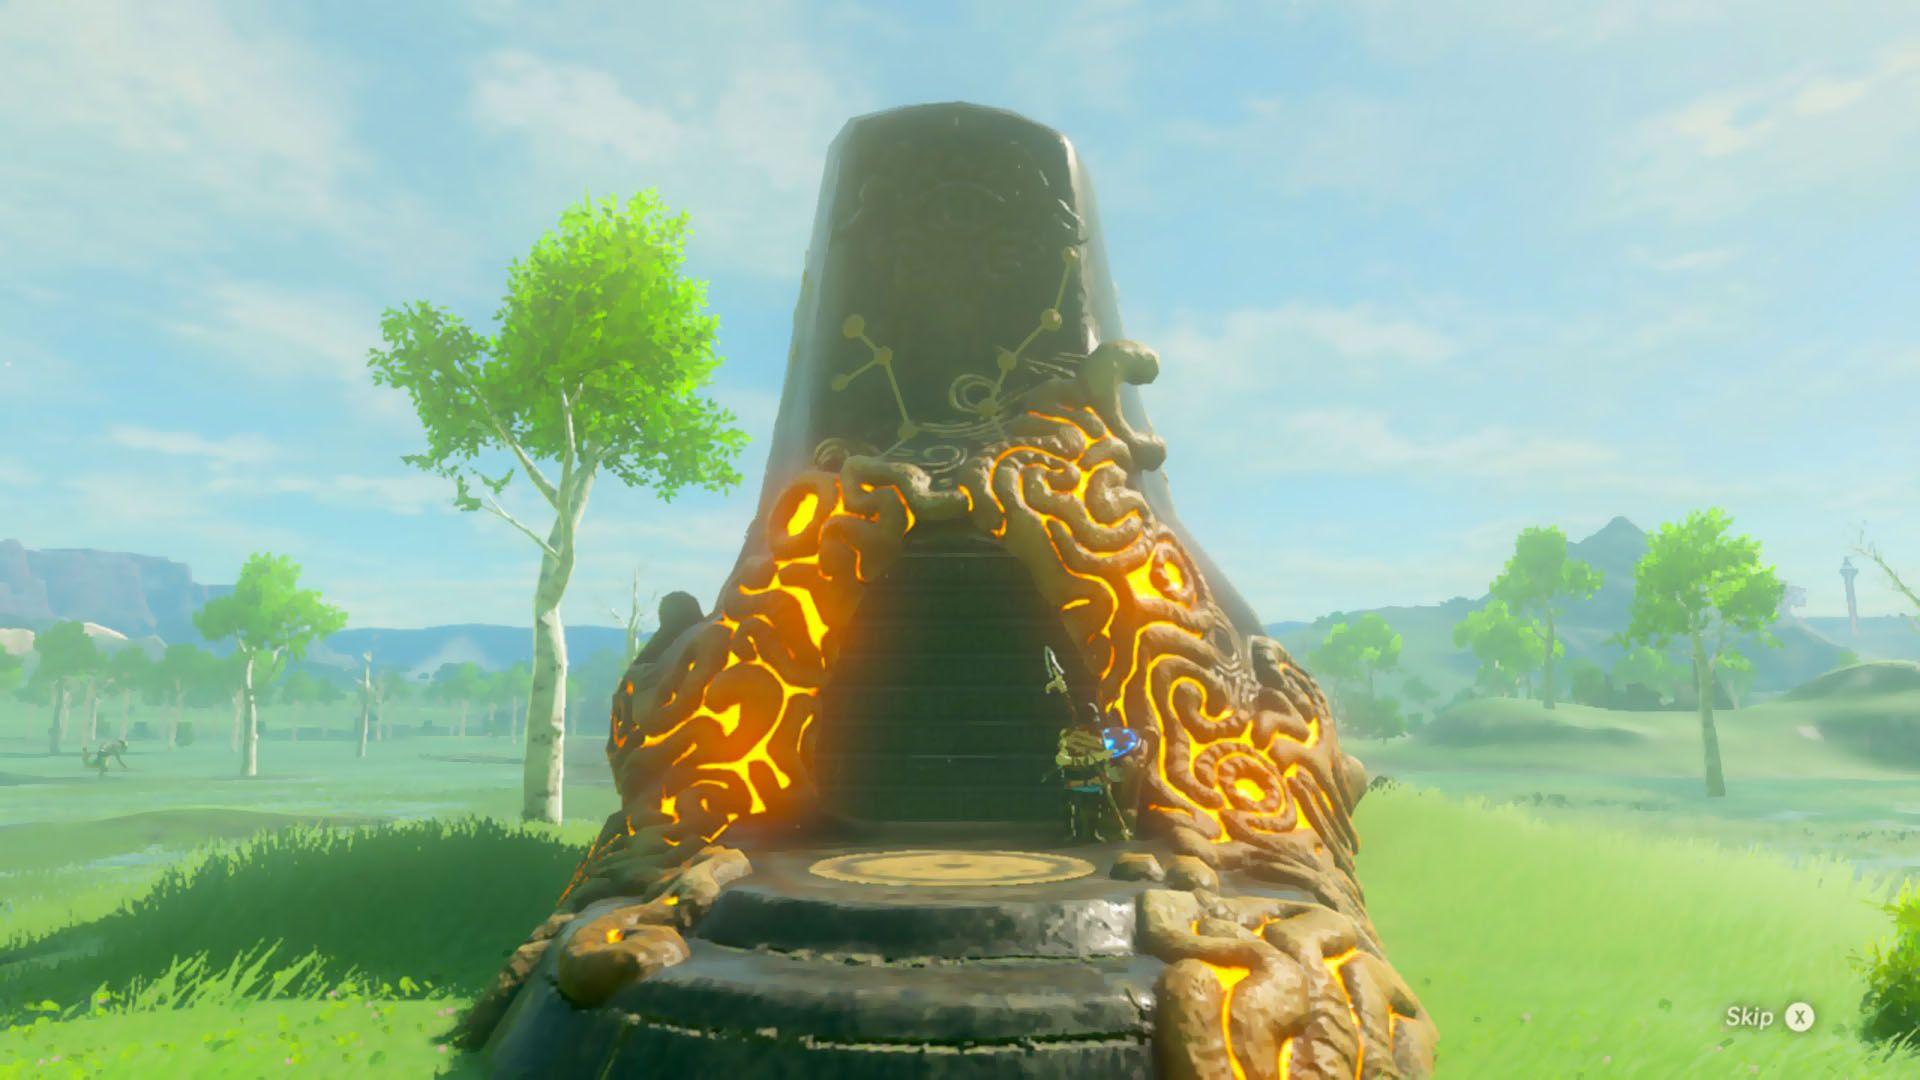 Guide: Where to find all of the Sheikah Shrines in Breath